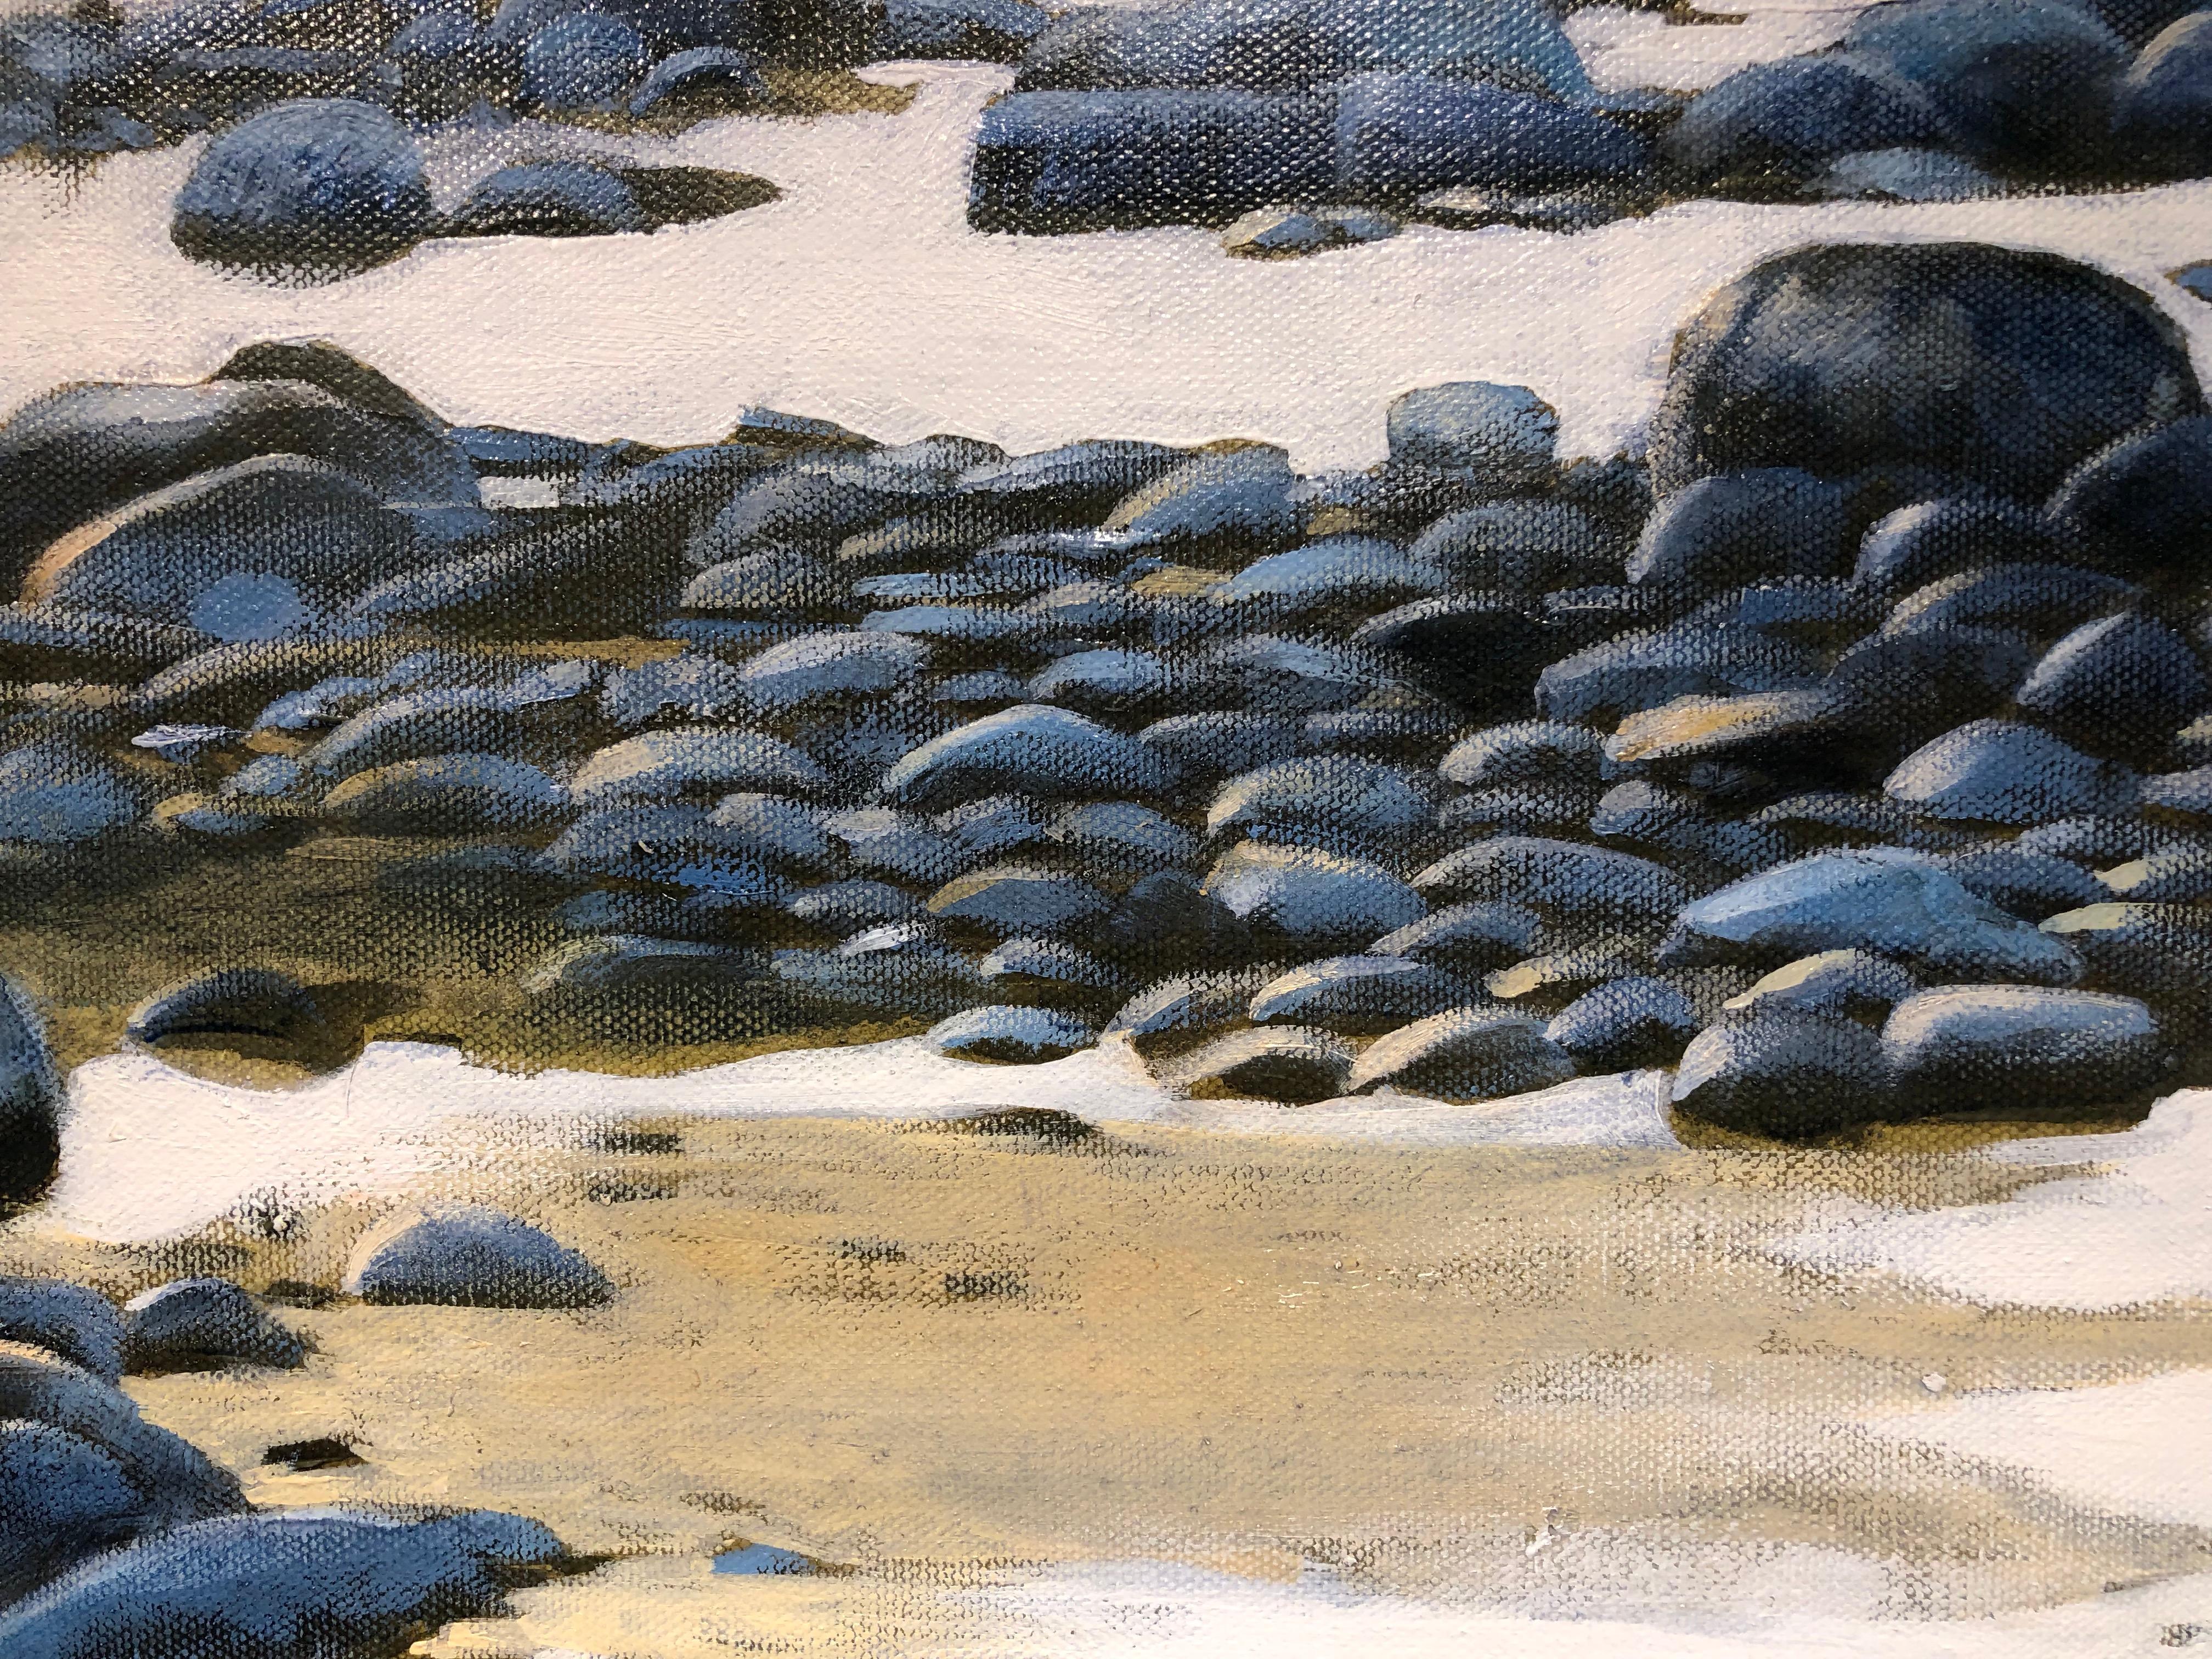 Going Blue - Original Oil on Canvas Painting with Water and Stones at the Shore - Gray Landscape Painting by Deborah Ebbers